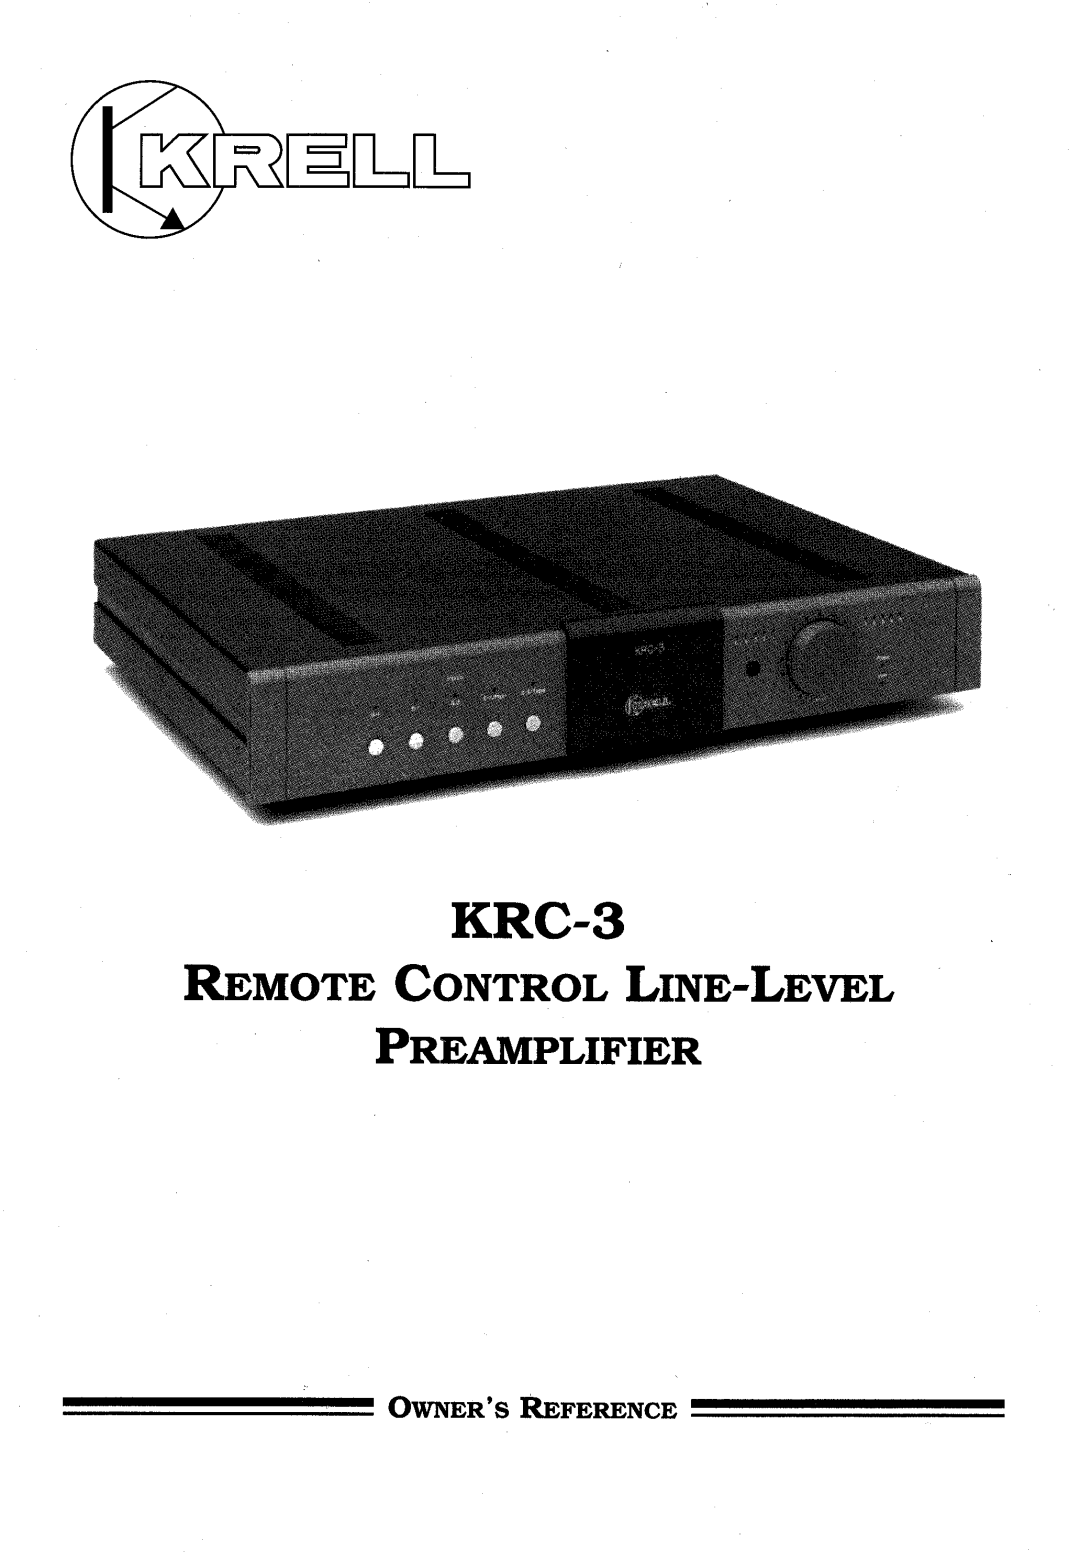 Krell Industries KRC-3 manual Remote Control Line-Level, Preamplifier, Owners Reference 